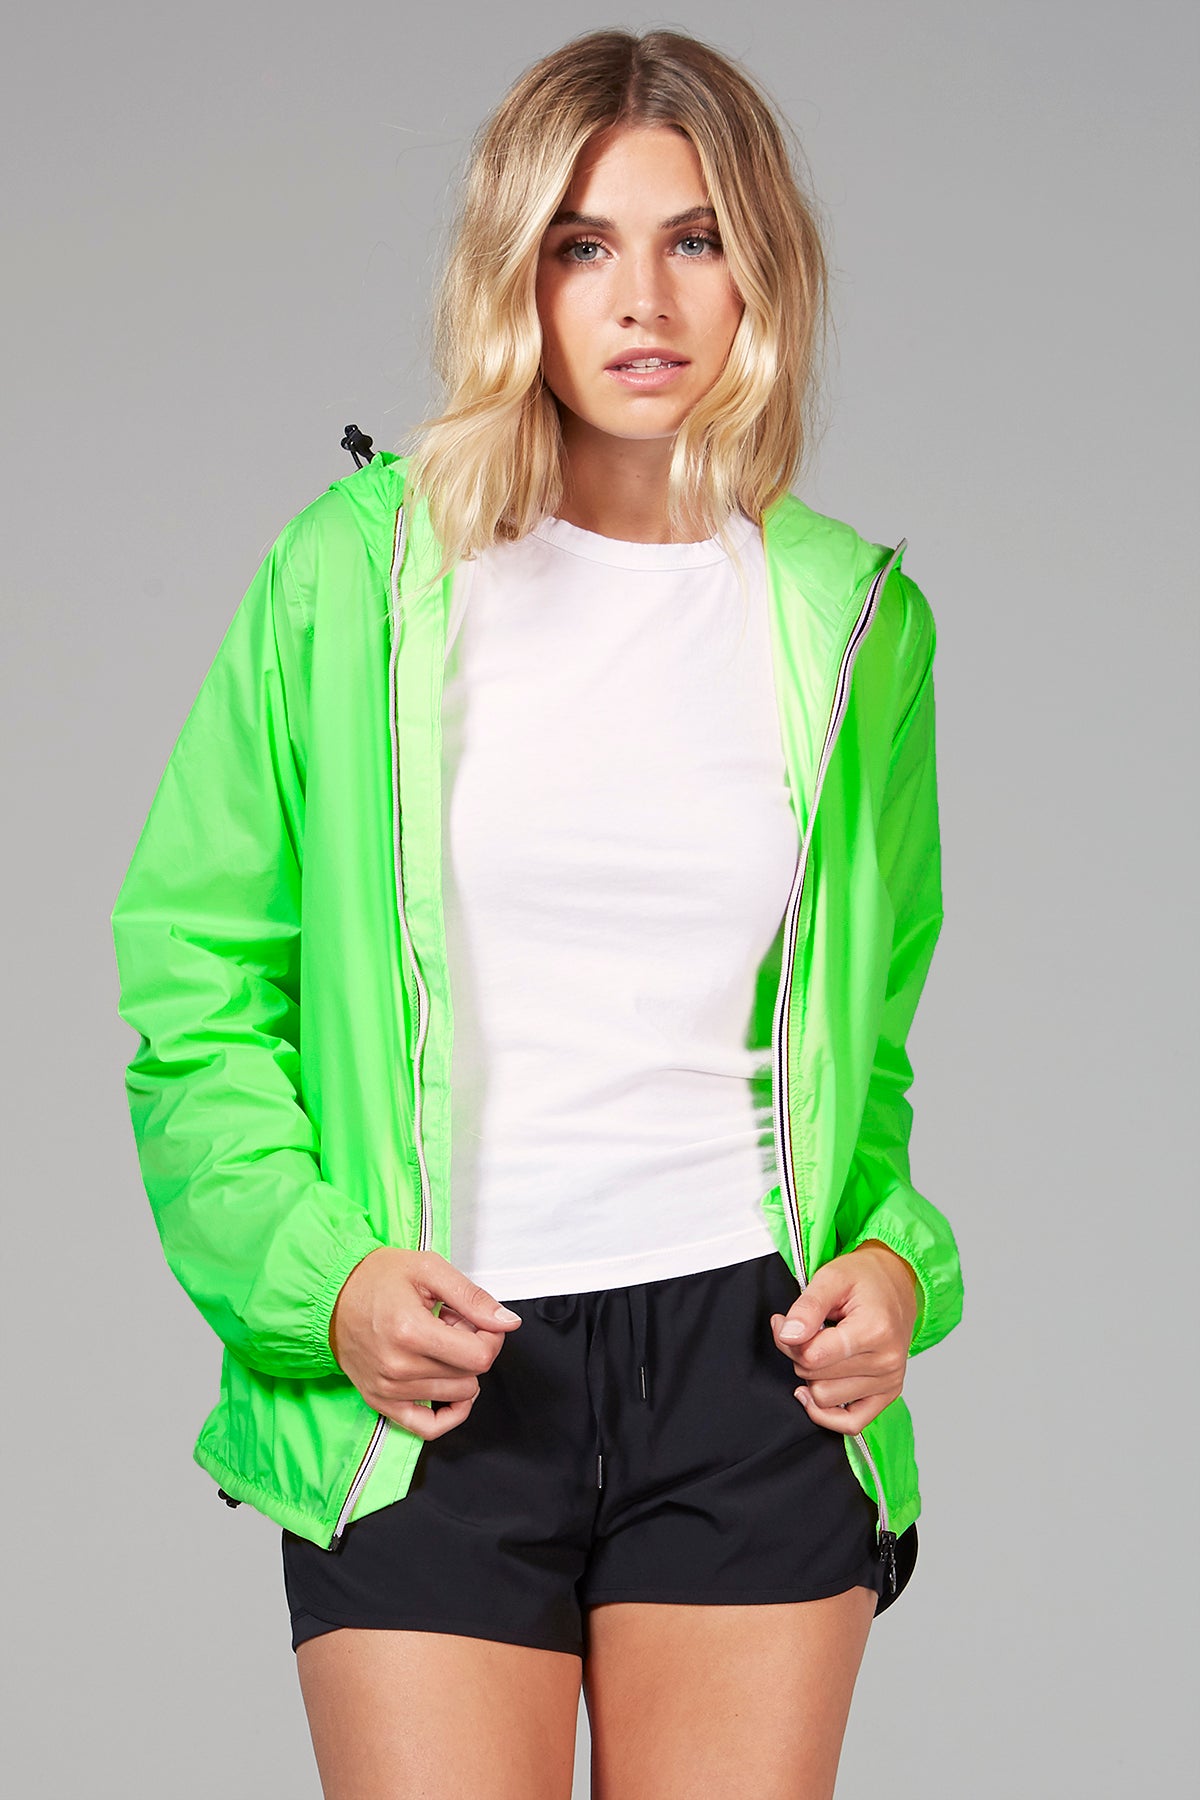 Max - green fluo full zip packable rain jacket - O8lifestyle.